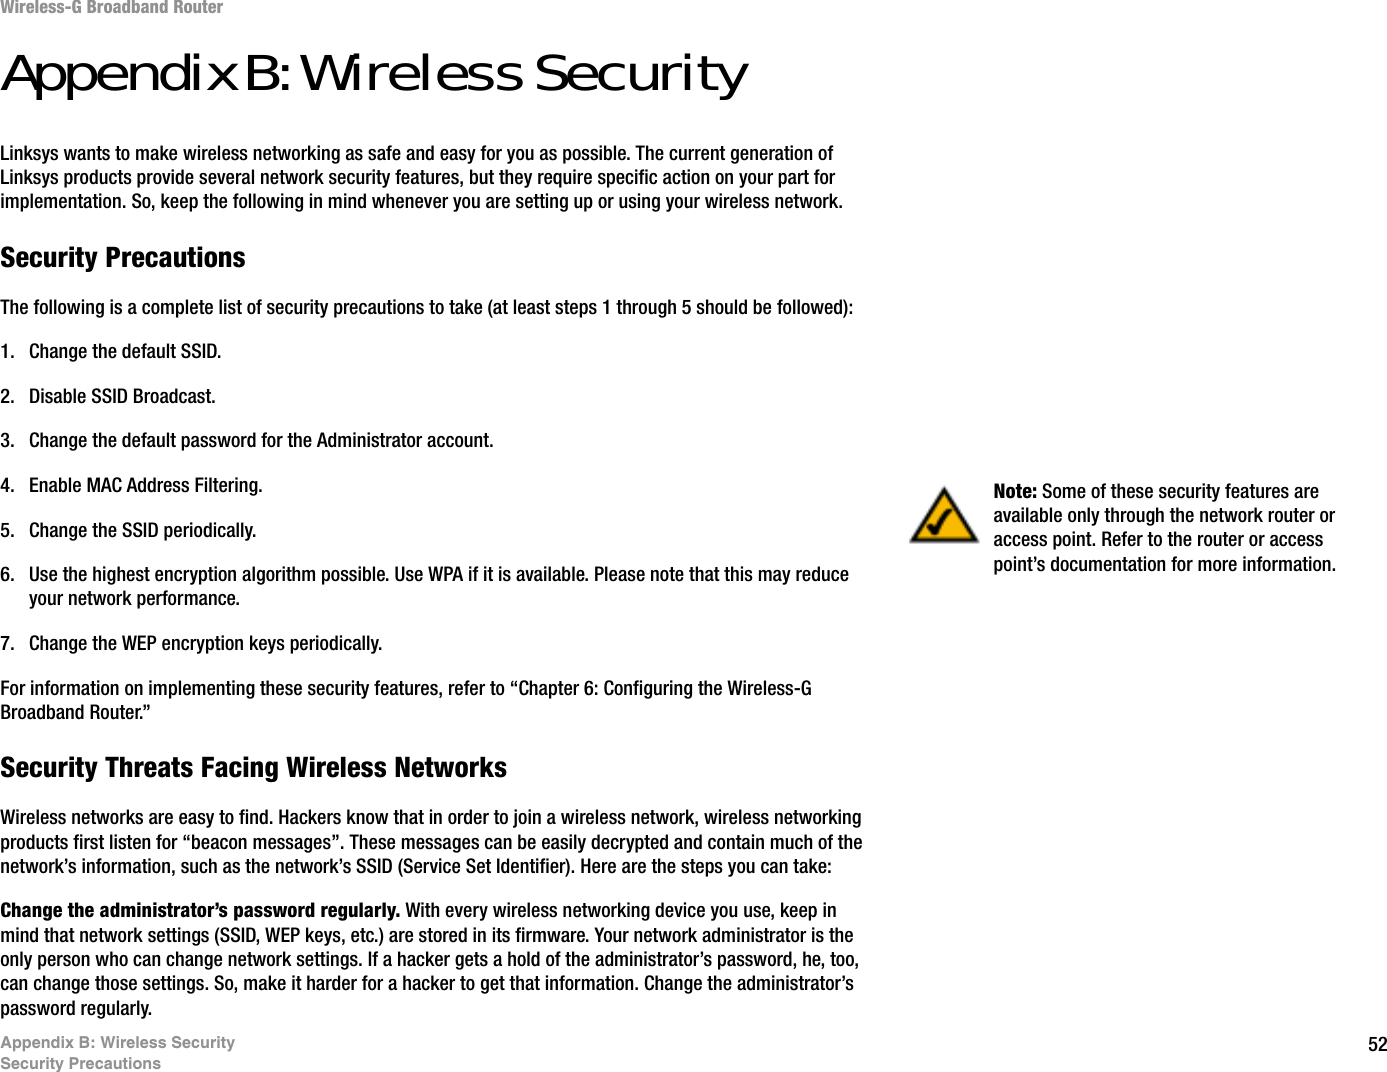 52Appendix B: Wireless SecuritySecurity PrecautionsWireless-G Broadband RouterAppendix B: Wireless SecurityLinksys wants to make wireless networking as safe and easy for you as possible. The current generation of Linksys products provide several network security features, but they require specific action on your part for implementation. So, keep the following in mind whenever you are setting up or using your wireless network.Security PrecautionsThe following is a complete list of security precautions to take (at least steps 1 through 5 should be followed):1. Change the default SSID. 2. Disable SSID Broadcast. 3. Change the default password for the Administrator account. 4. Enable MAC Address Filtering. 5. Change the SSID periodically. 6. Use the highest encryption algorithm possible. Use WPA if it is available. Please note that this may reduce your network performance. 7. Change the WEP encryption keys periodically. For information on implementing these security features, refer to “Chapter 6: Configuring the Wireless-G Broadband Router.”Security Threats Facing Wireless Networks Wireless networks are easy to find. Hackers know that in order to join a wireless network, wireless networking products first listen for “beacon messages”. These messages can be easily decrypted and contain much of the network’s information, such as the network’s SSID (Service Set Identifier). Here are the steps you can take:Change the administrator’s password regularly. With every wireless networking device you use, keep in mind that network settings (SSID, WEP keys, etc.) are stored in its firmware. Your network administrator is the only person who can change network settings. If a hacker gets a hold of the administrator’s password, he, too, can change those settings. So, make it harder for a hacker to get that information. Change the administrator’s password regularly.Note: Some of these security features are available only through the network router or access point. Refer to the router or access point’s documentation for more information.